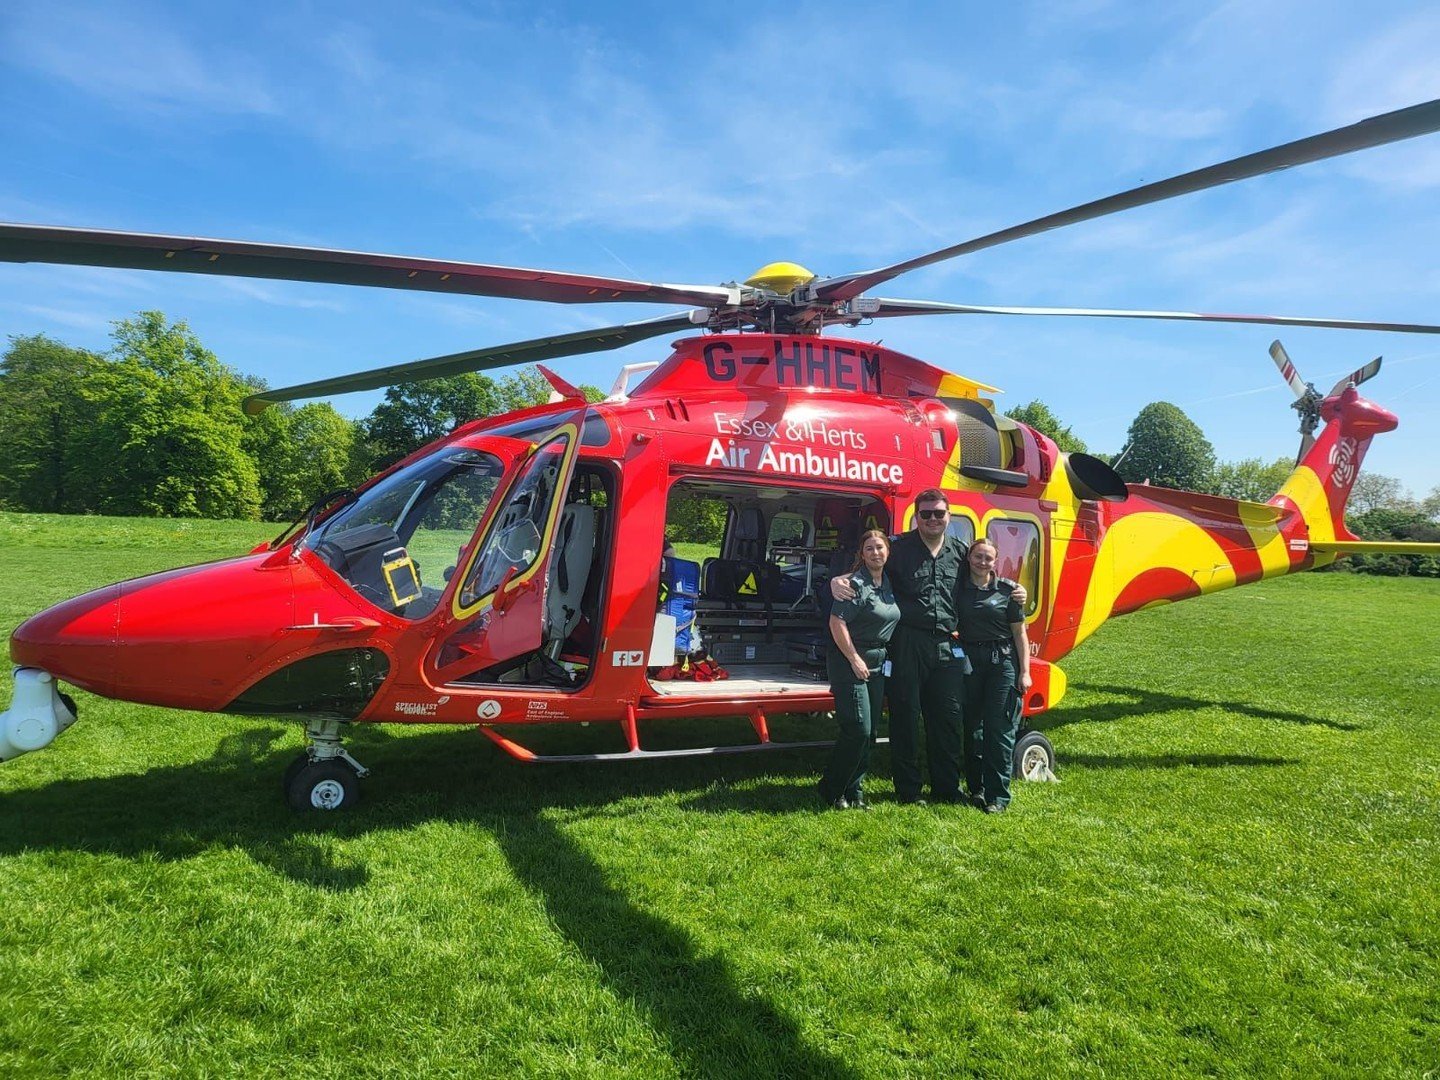 It's not every day that you get flown over London thanks to our friends over at @ehaat_ who we've seen quite a lot recently!

Behind the scenes Sophie, Mitch and Megan worked alongside EHAAT medical teams to deliver outstanding care to the patient an